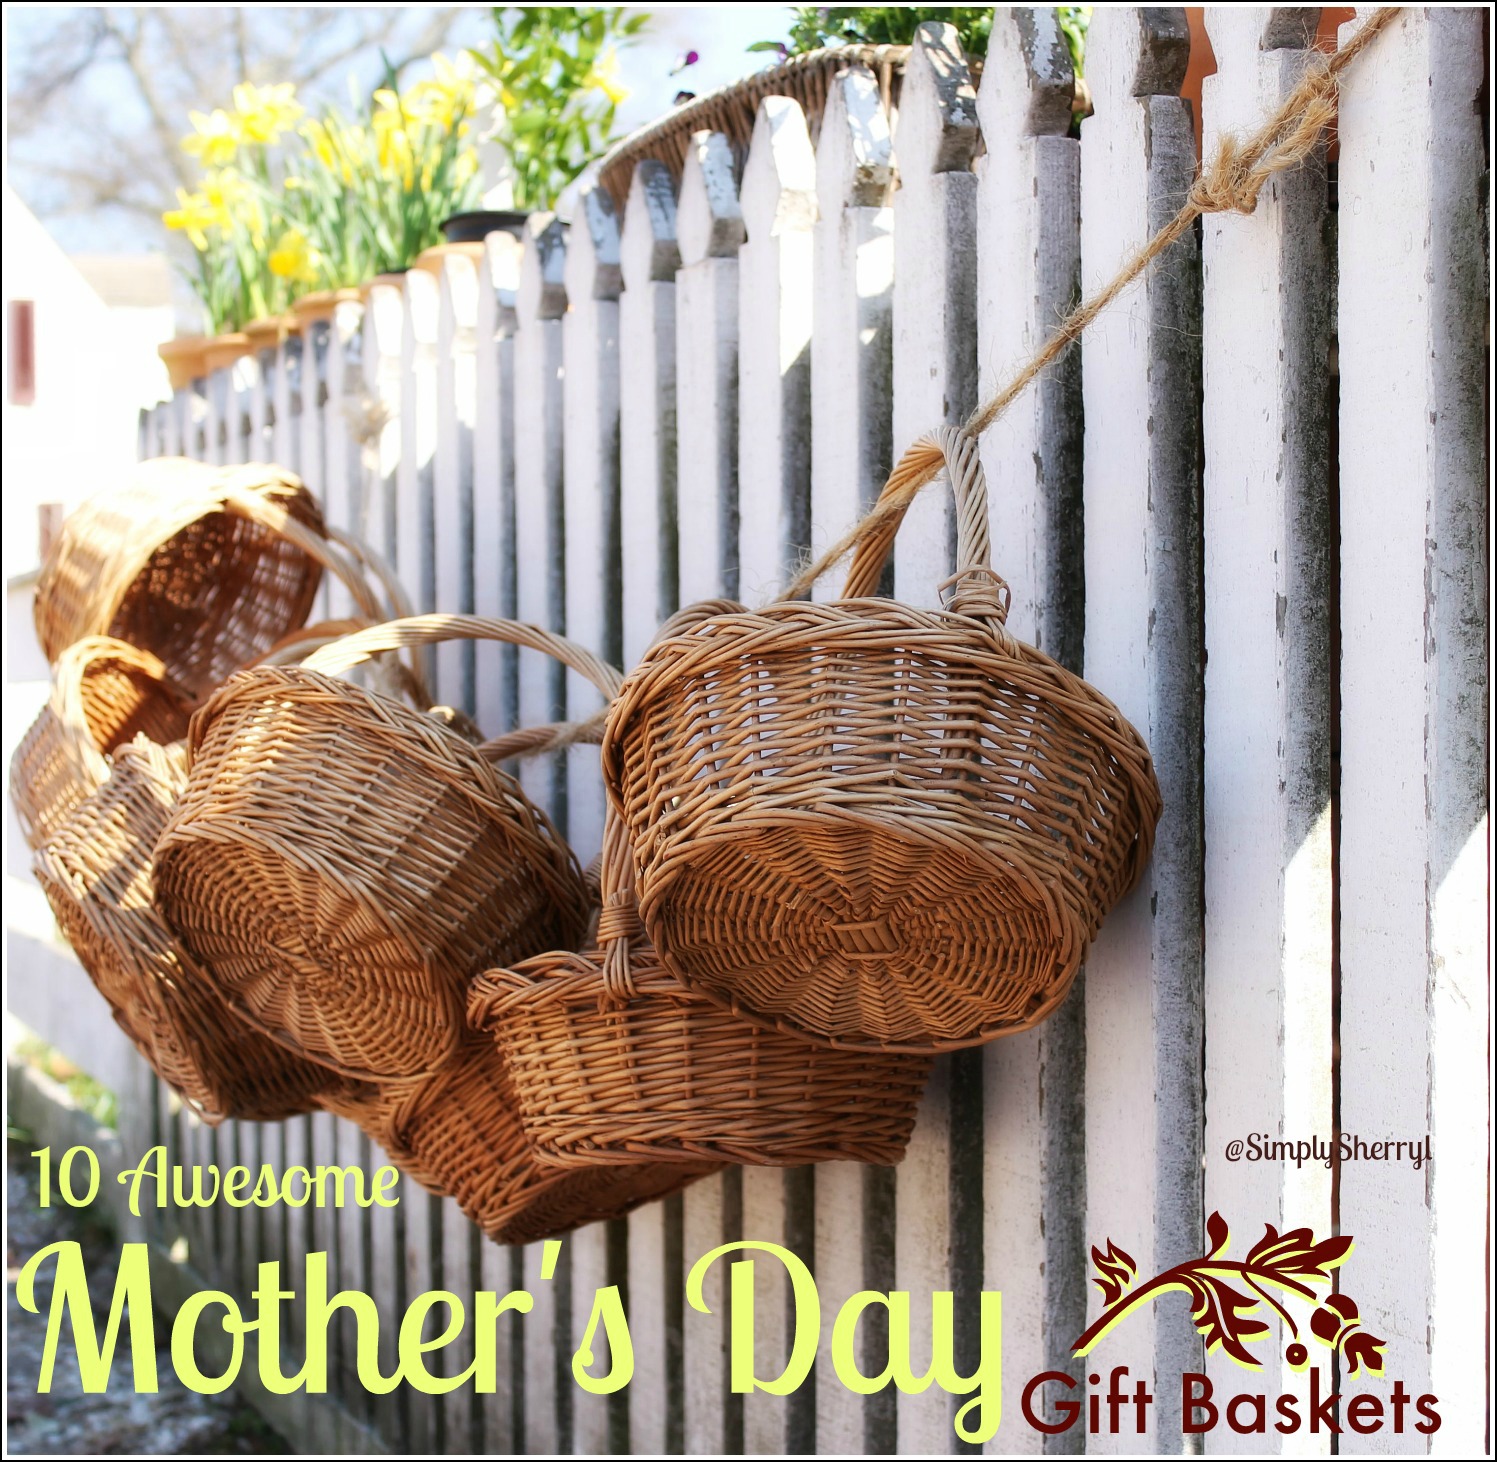 10 Awesome Mother's Day Gift Baskets